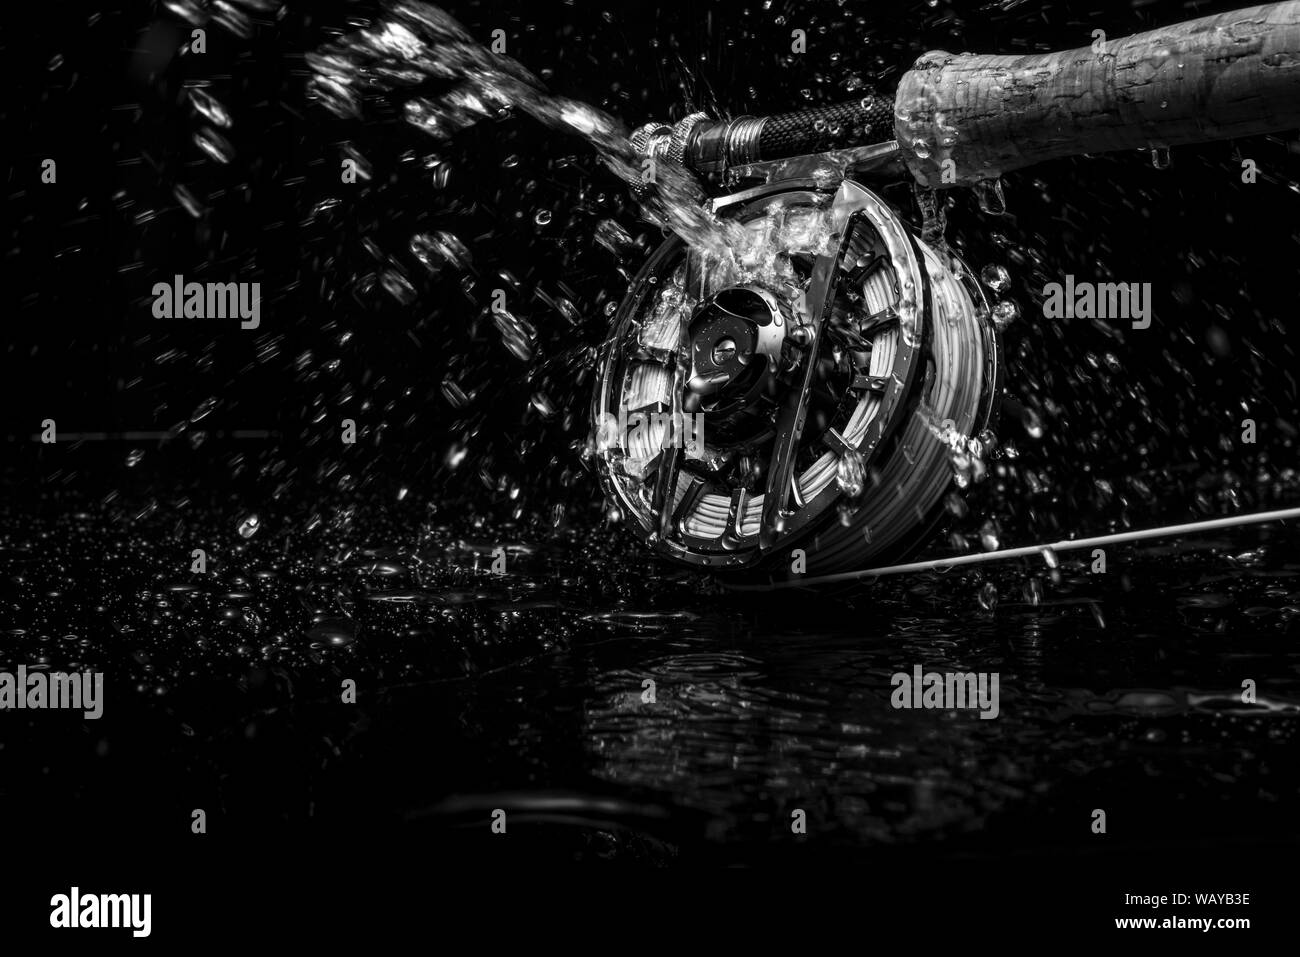 Fishing rod with reel Black and White Stock Photos & Images - Alamy